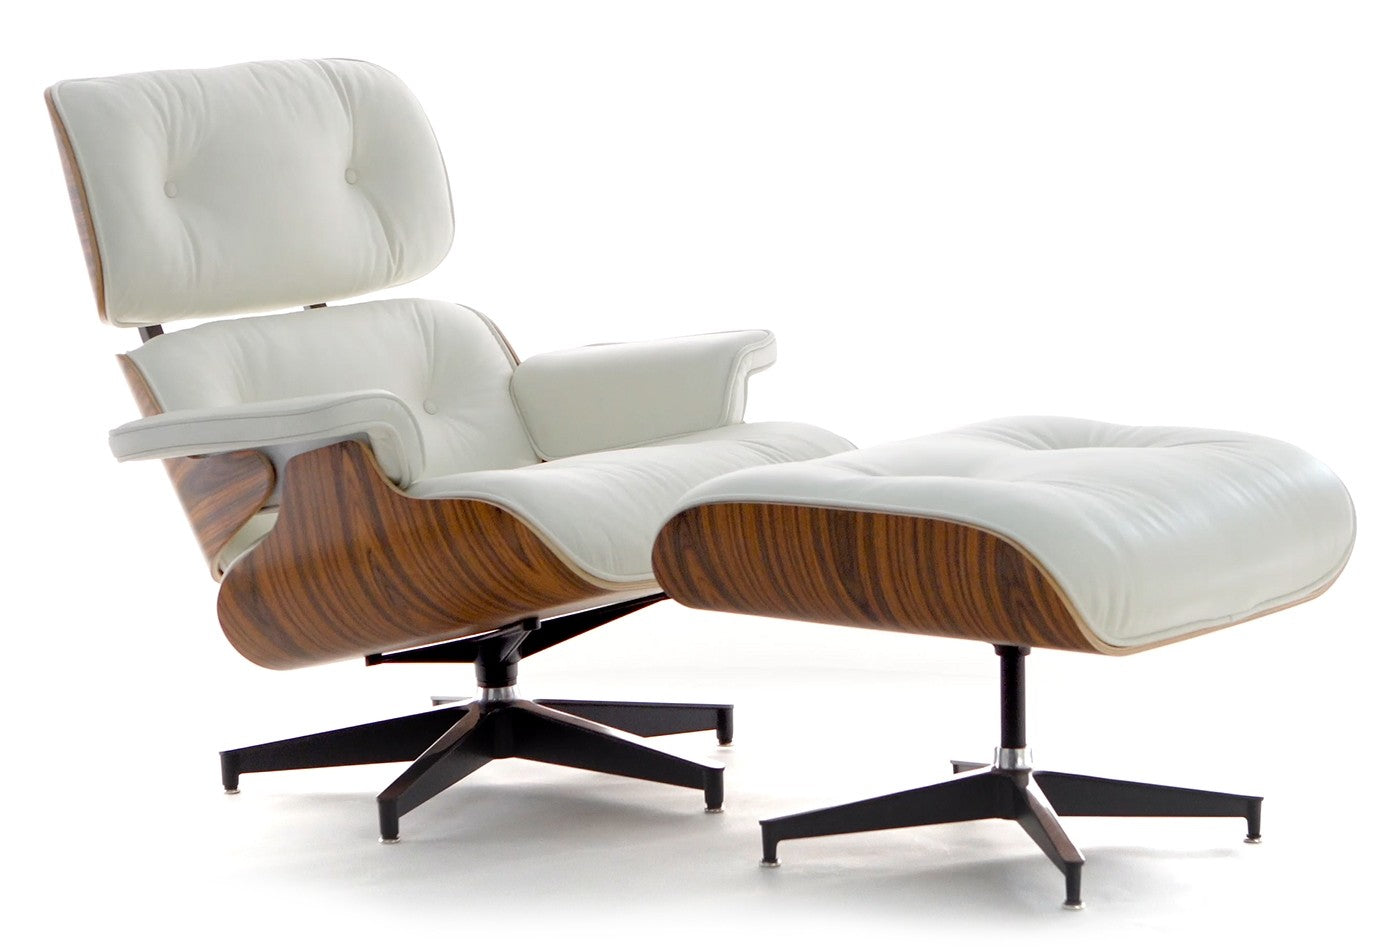 Eames-Inspired Rosewood Genuine Leather Lounge Chair + Ottoman